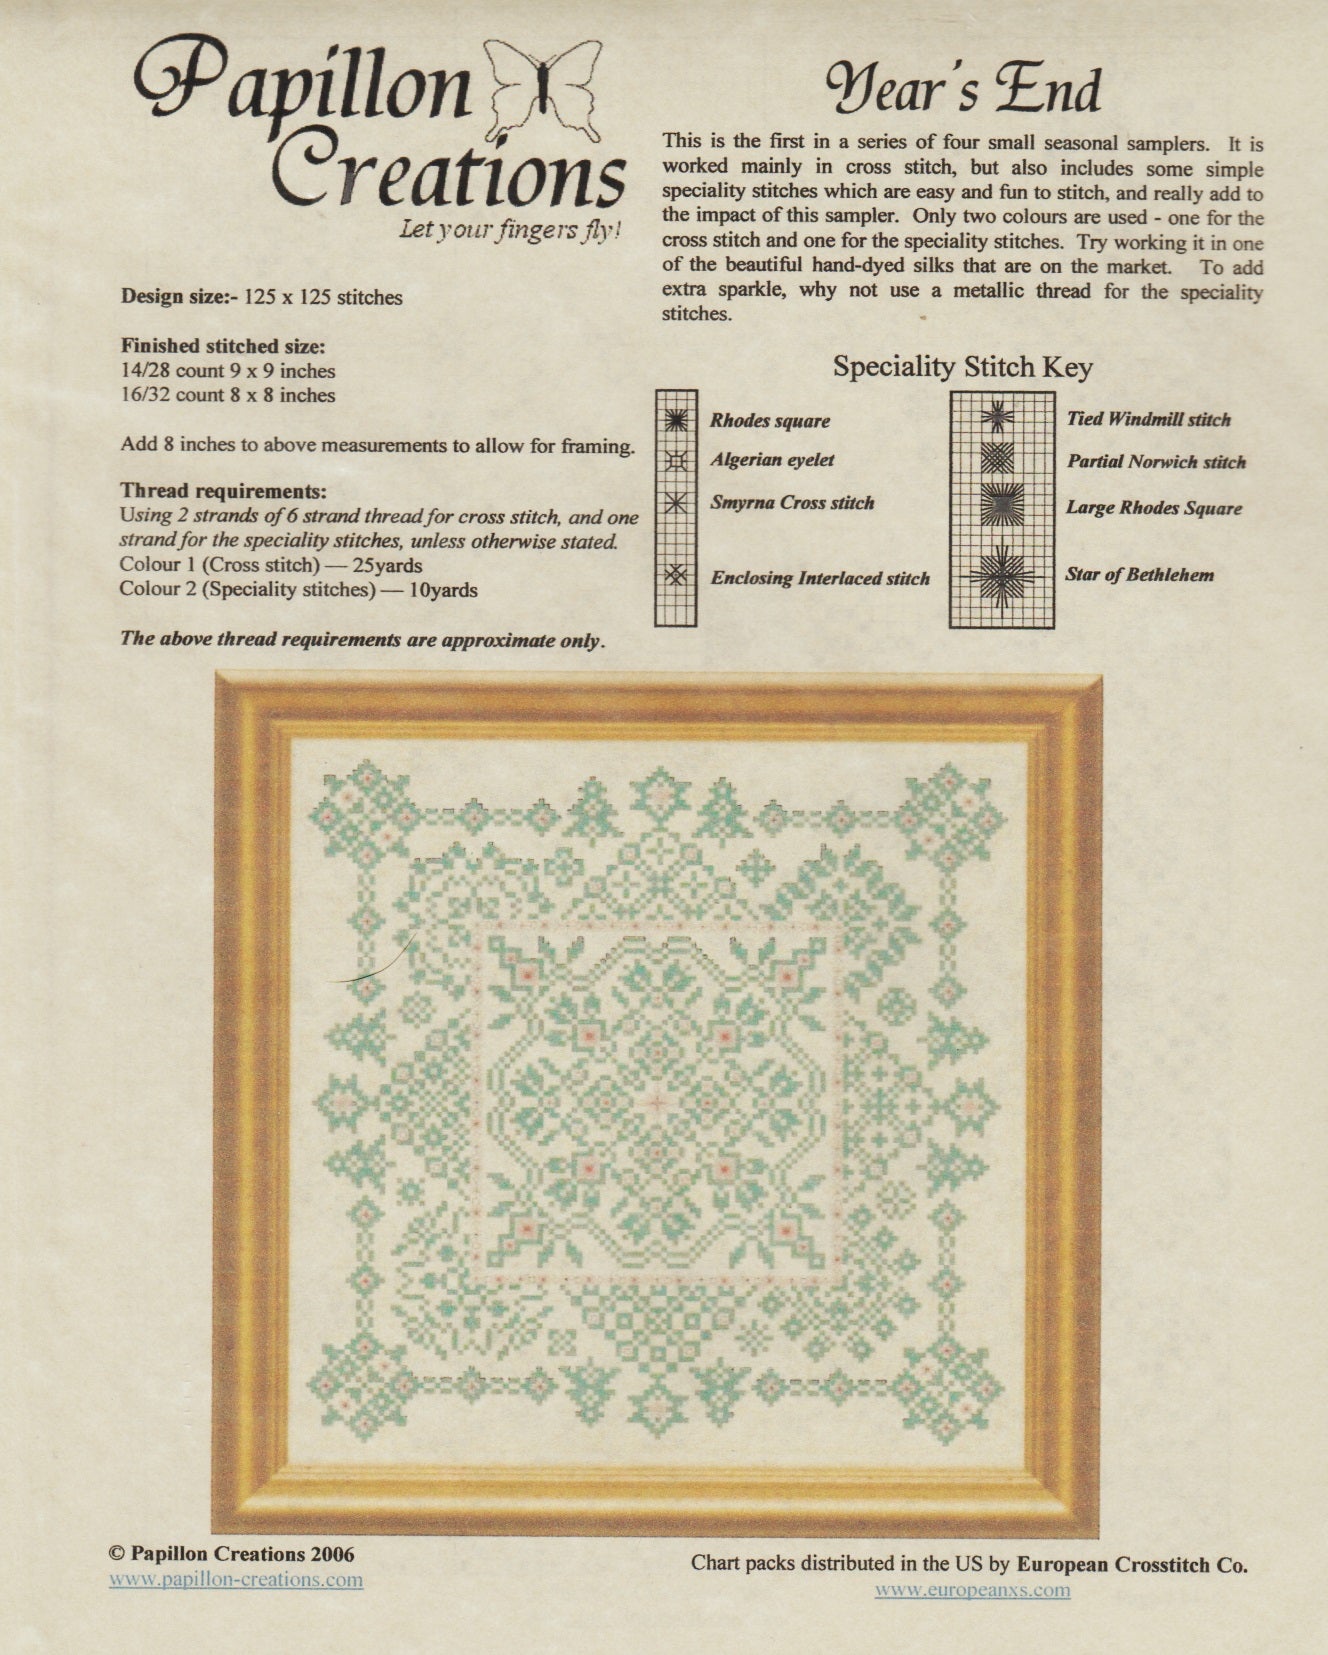 Papillon Creations Year's End sampler PC019 cross stitch pattern